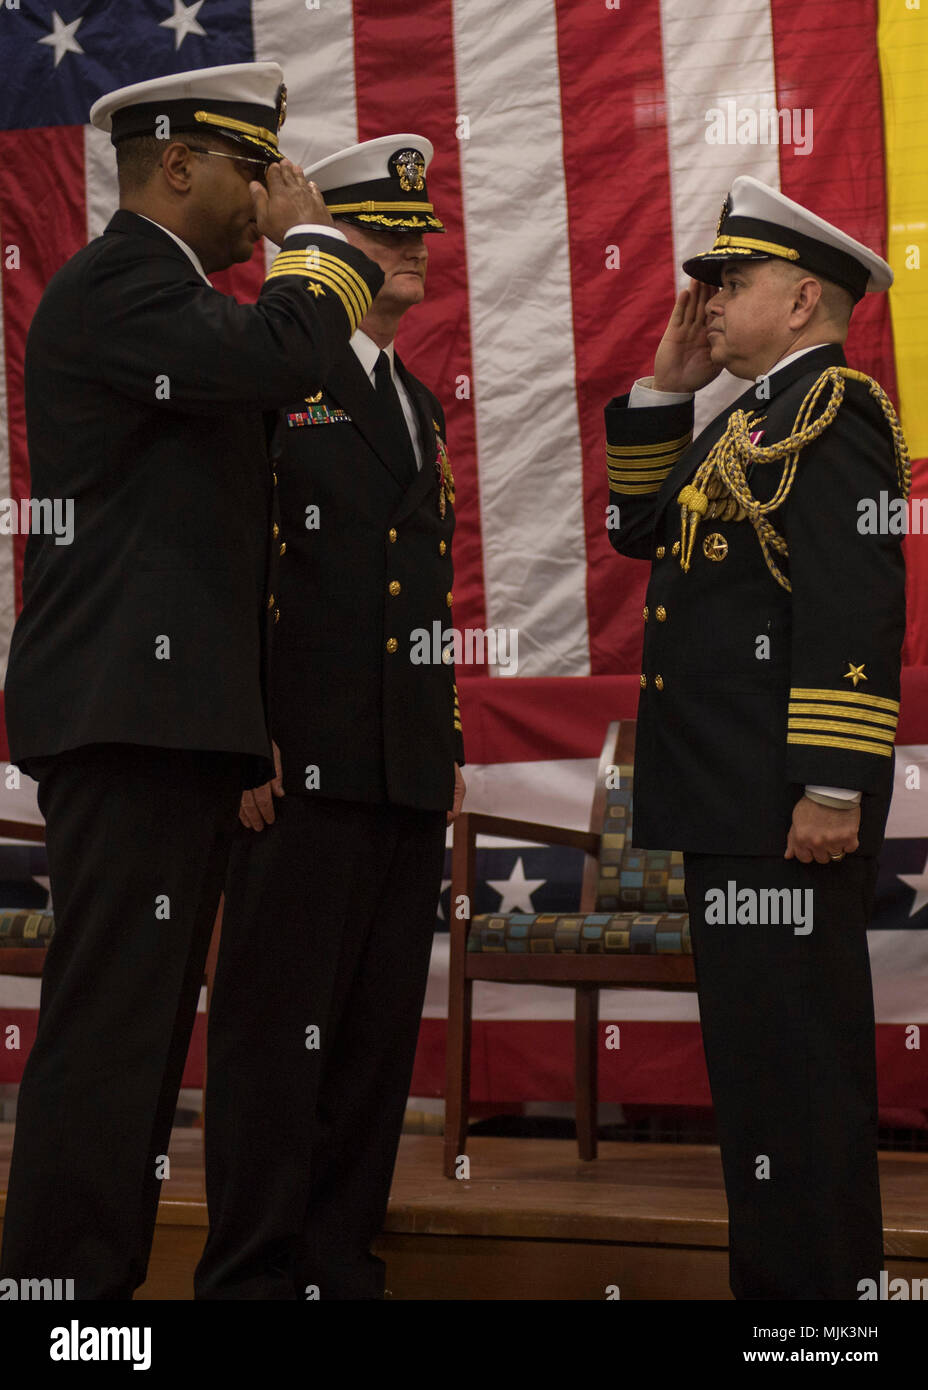 171207-N-GP524-0388  NAVAL SUPPORT FACILITY DEVESELU, Romania (December 7, 2017) Capt. Charlos Washington, left, commanding officer of Naval Support Facility (NSF) Deveselu, salutes Capt. Lawrence Vasquez, chief of staff, Navy Region Europe, Africa, Southwest Asia, after taking command during the NSF Deveselu change of command ceremony. During the ceremony Capt. Washington relieved Capt. Jon Grant as commanding officer. NSF Deveselu and Aegis Ashore Missile Defense System Romania are co-located in with the Romanian 99th Military Base and play a key role in ballistic missile defense in Eastern  Stock Photo